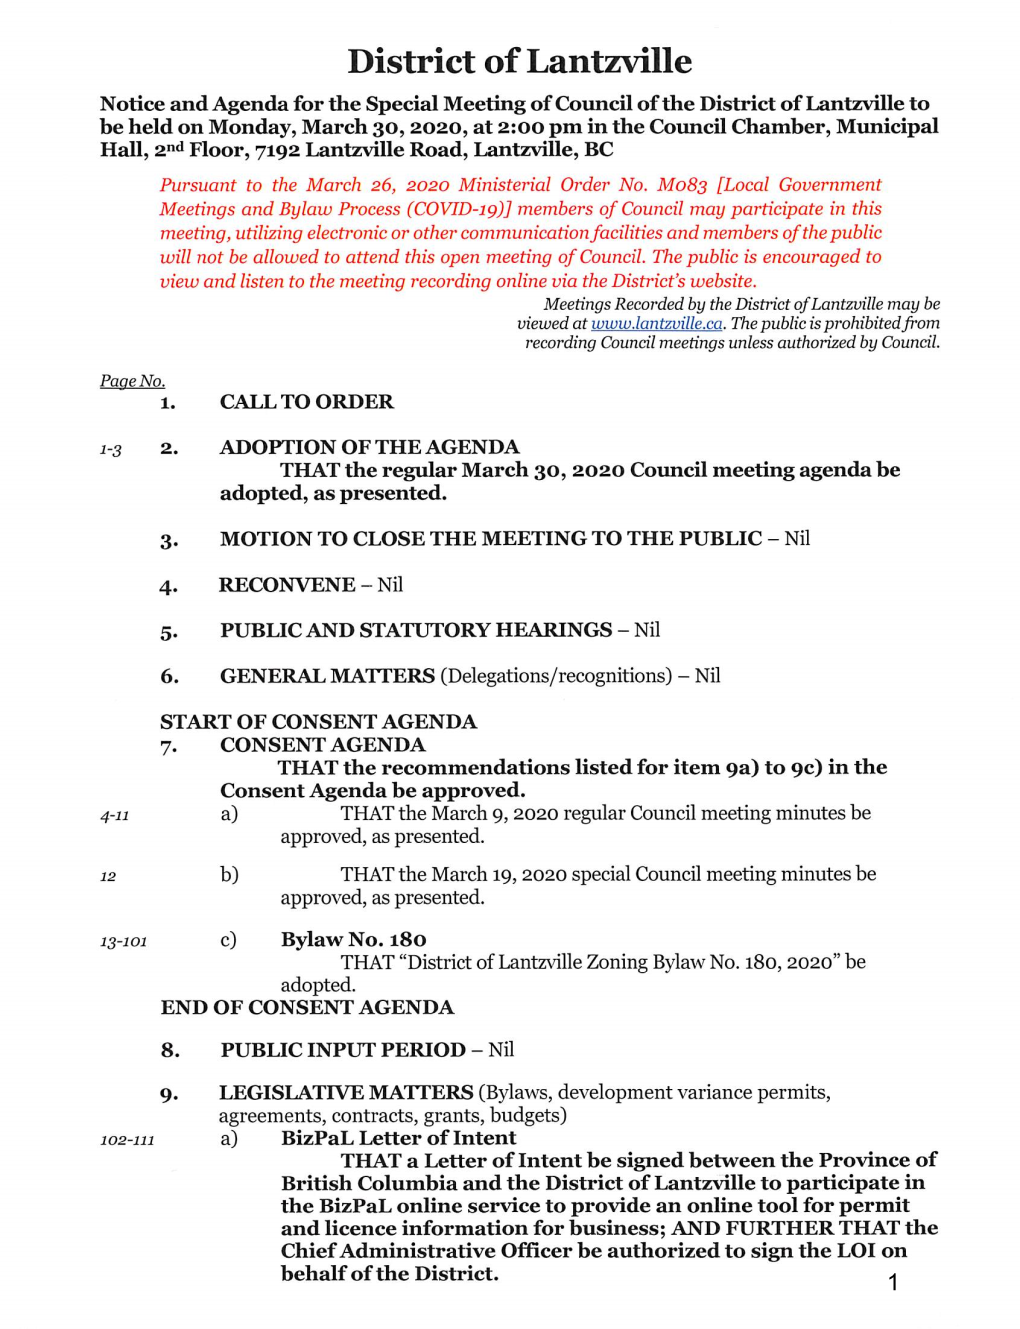 Notice and Agenda for Special Council Meeting